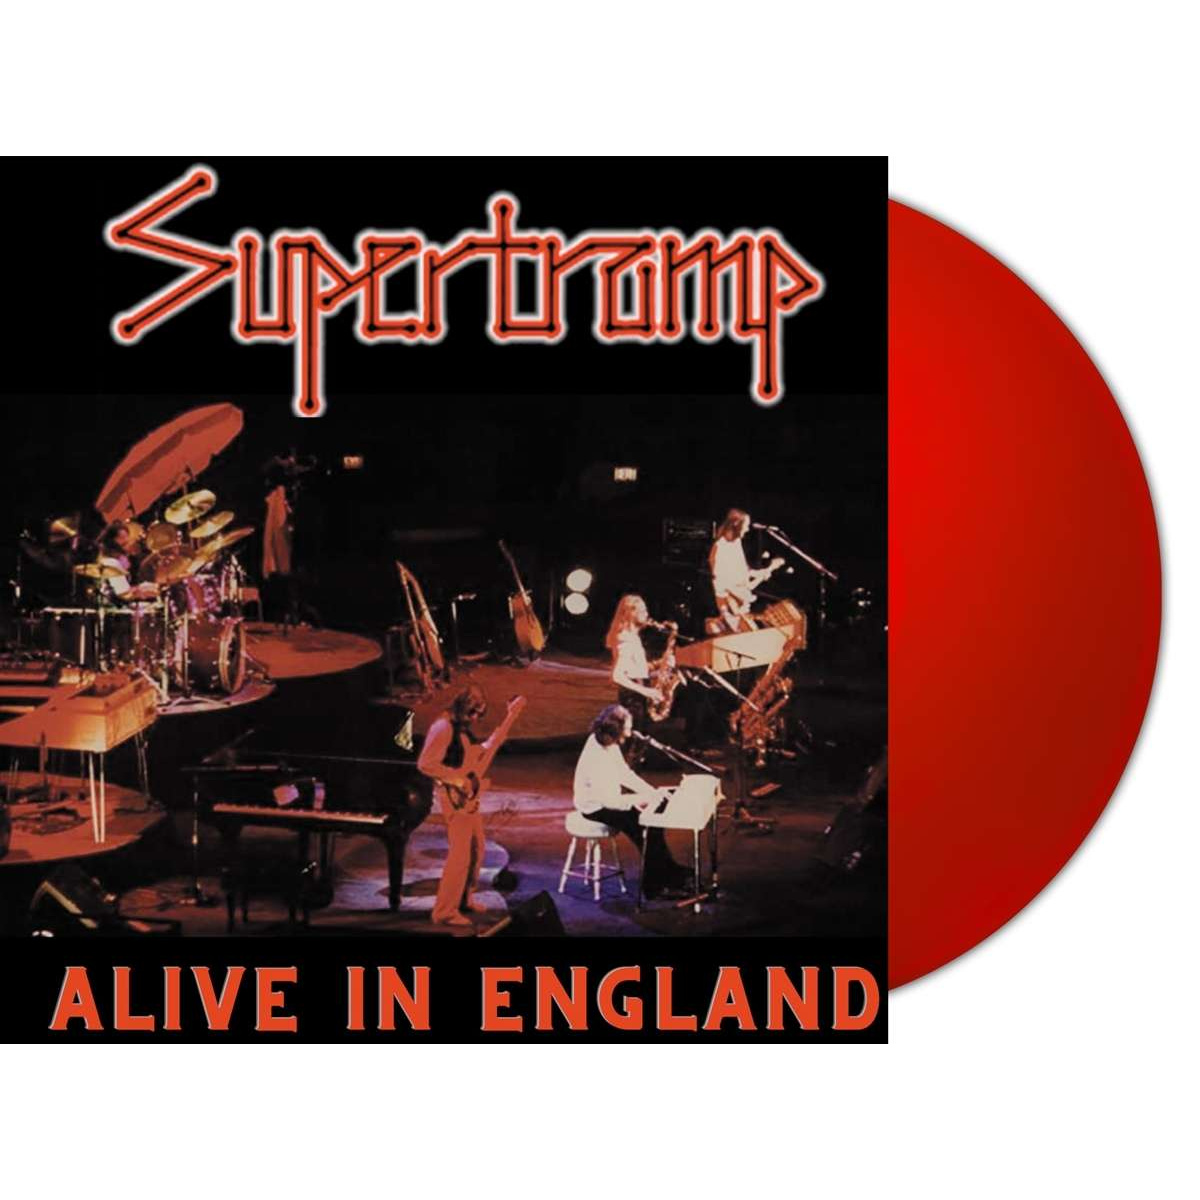 ALIVE IN ENGLAND (RED VINYL)